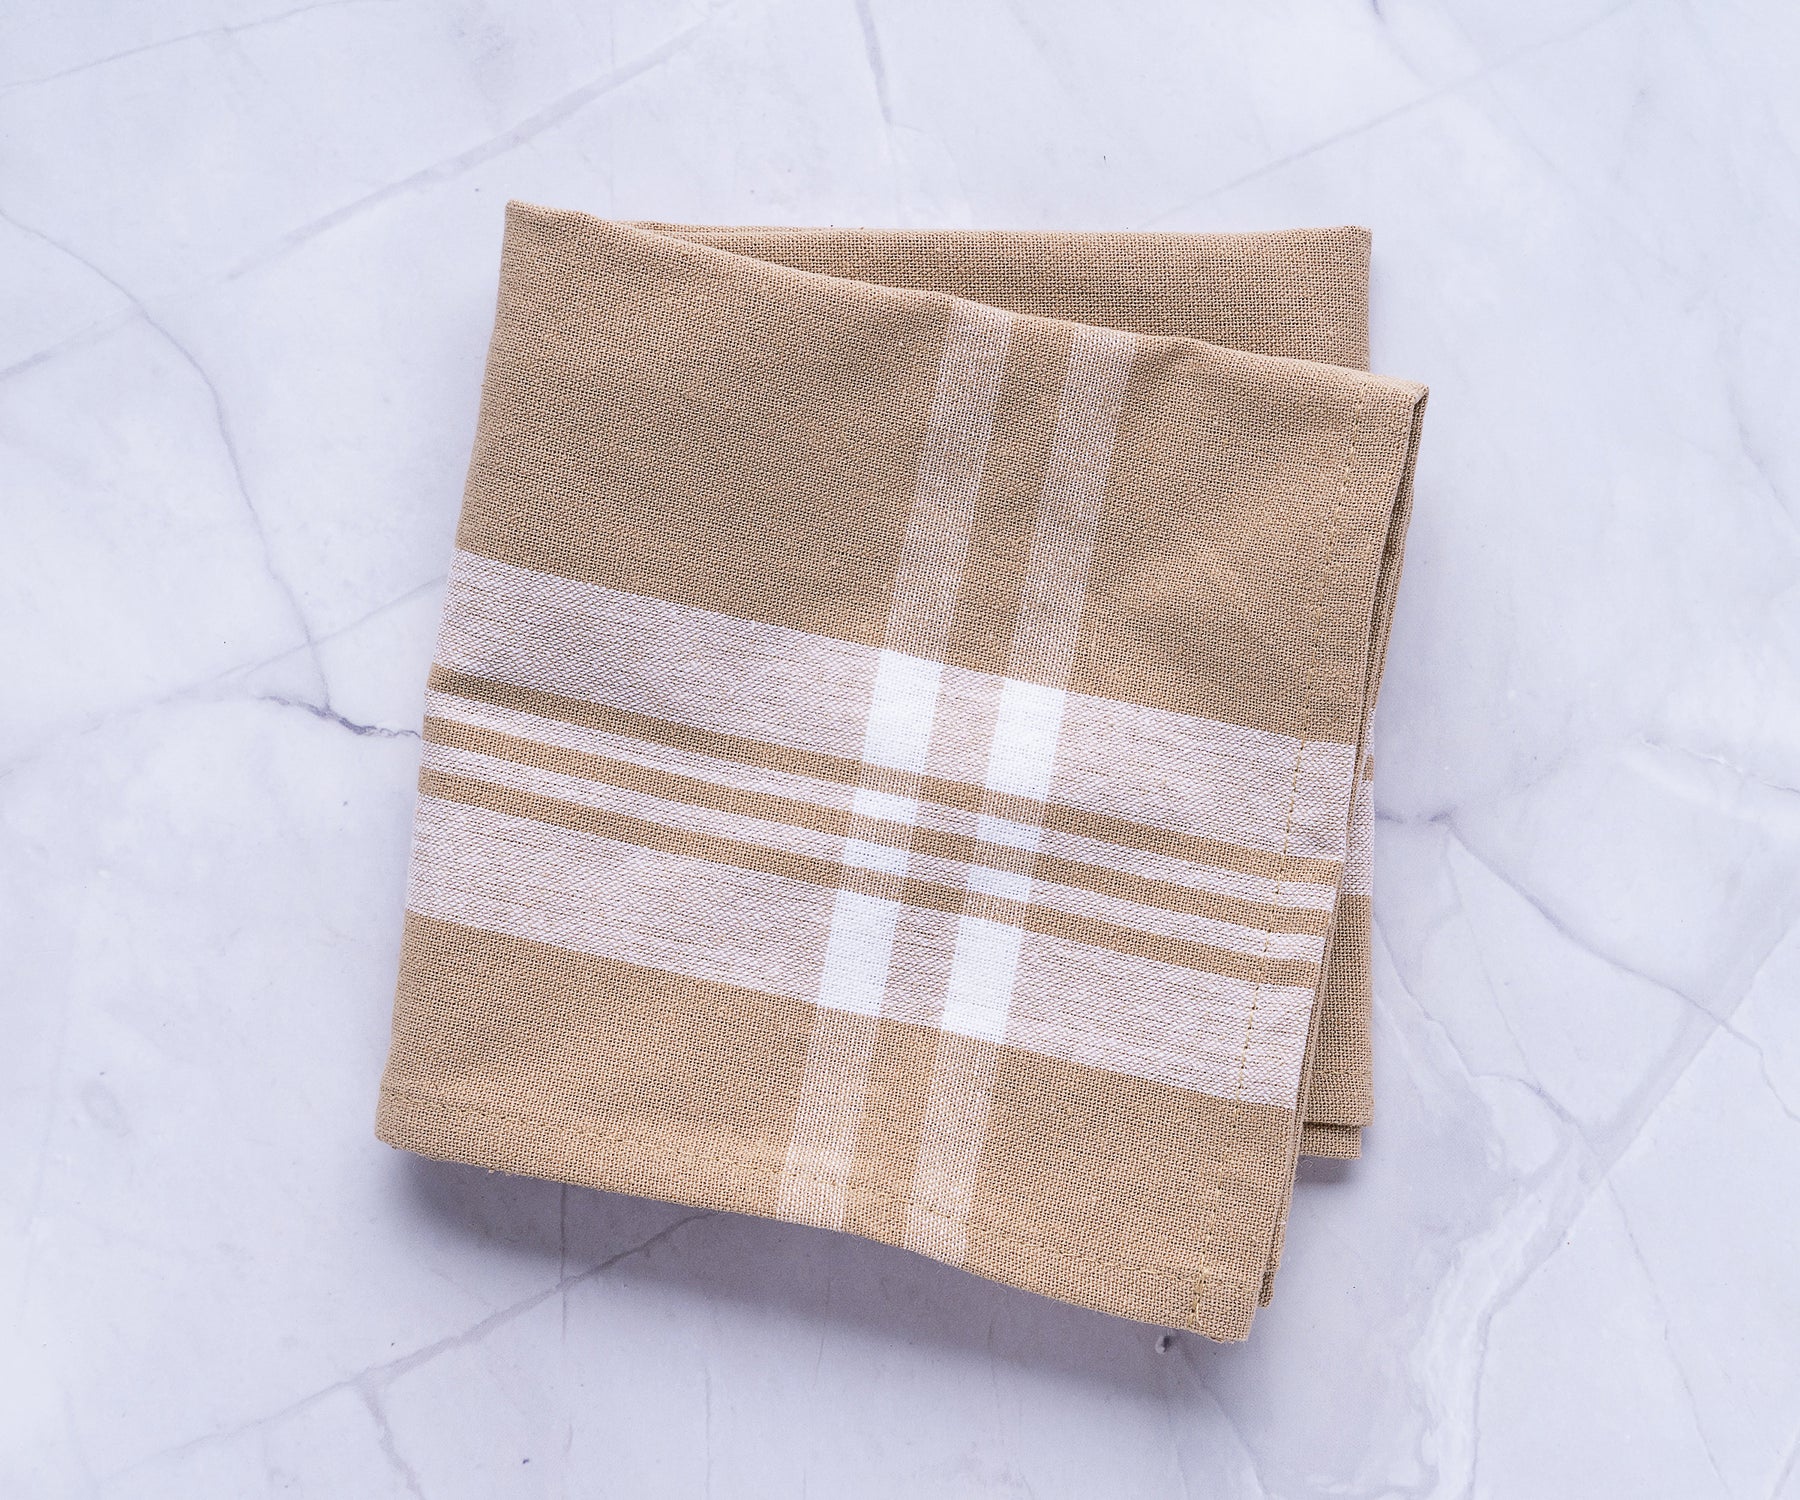 A brown and white plaid farmhouse kitchen towel on a textured marble surface